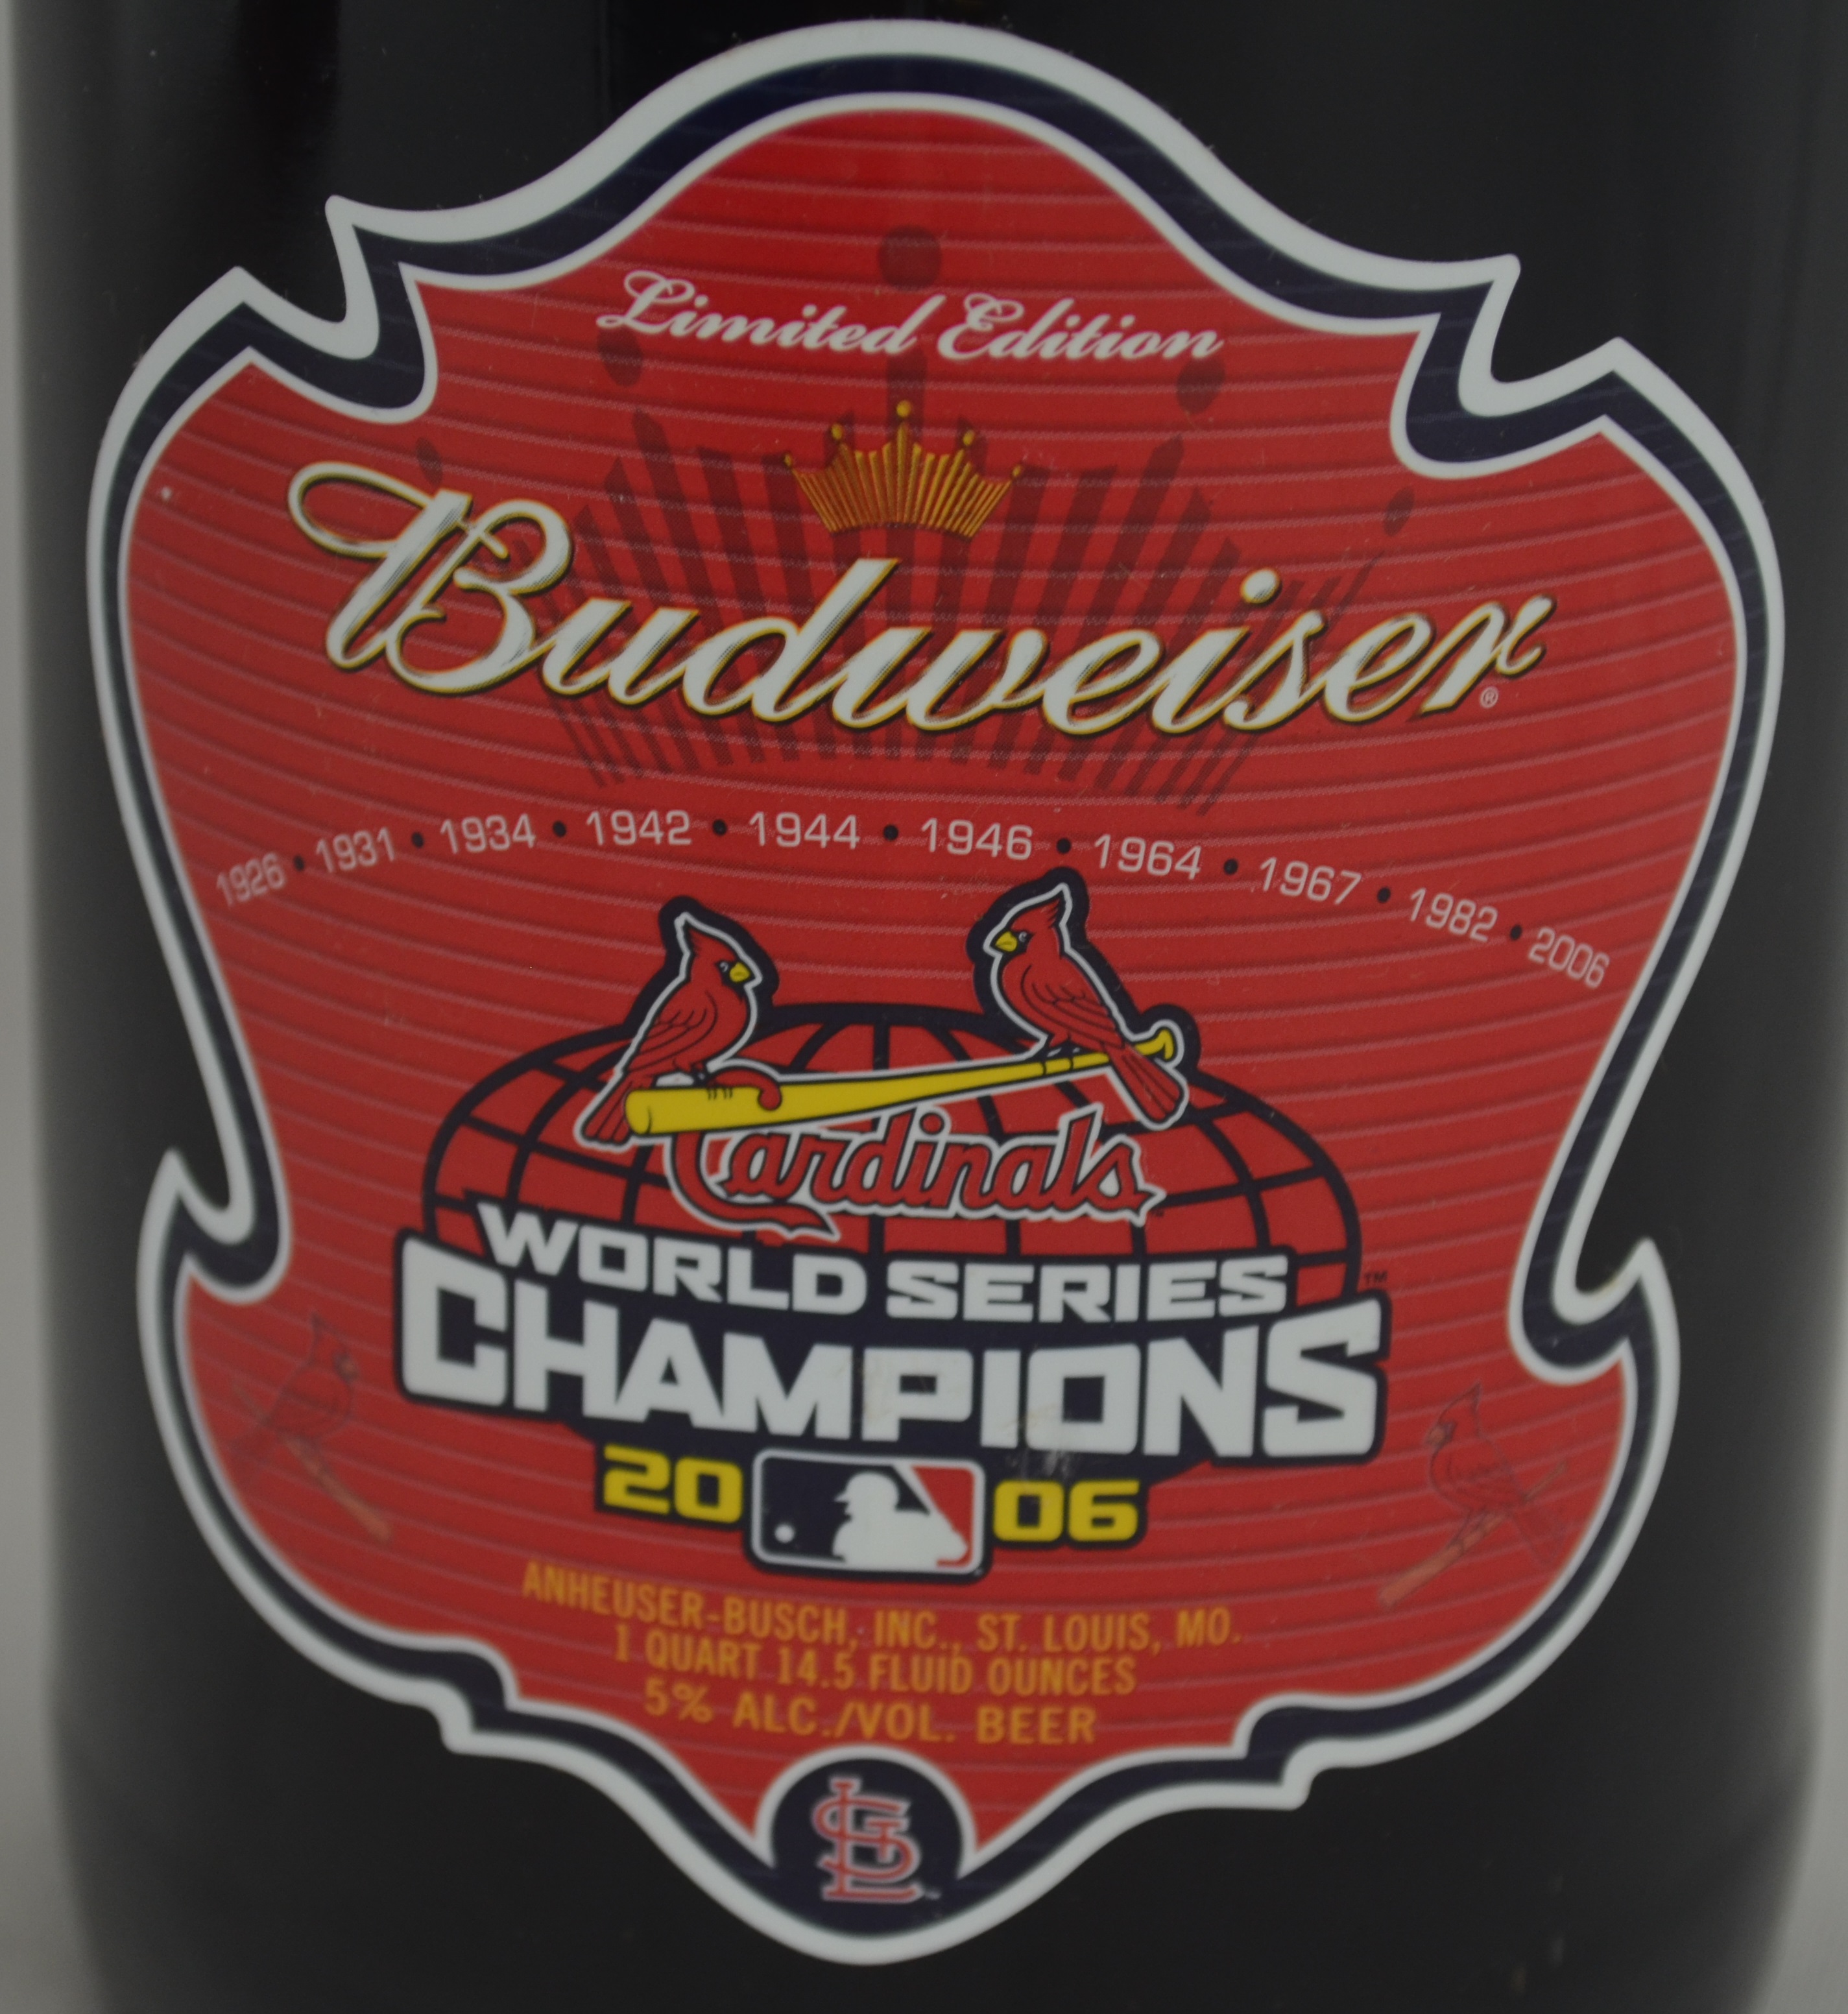 St. Louis Cardinals 2006 World Series Champions 8x10 Numbered To 5000 Photo